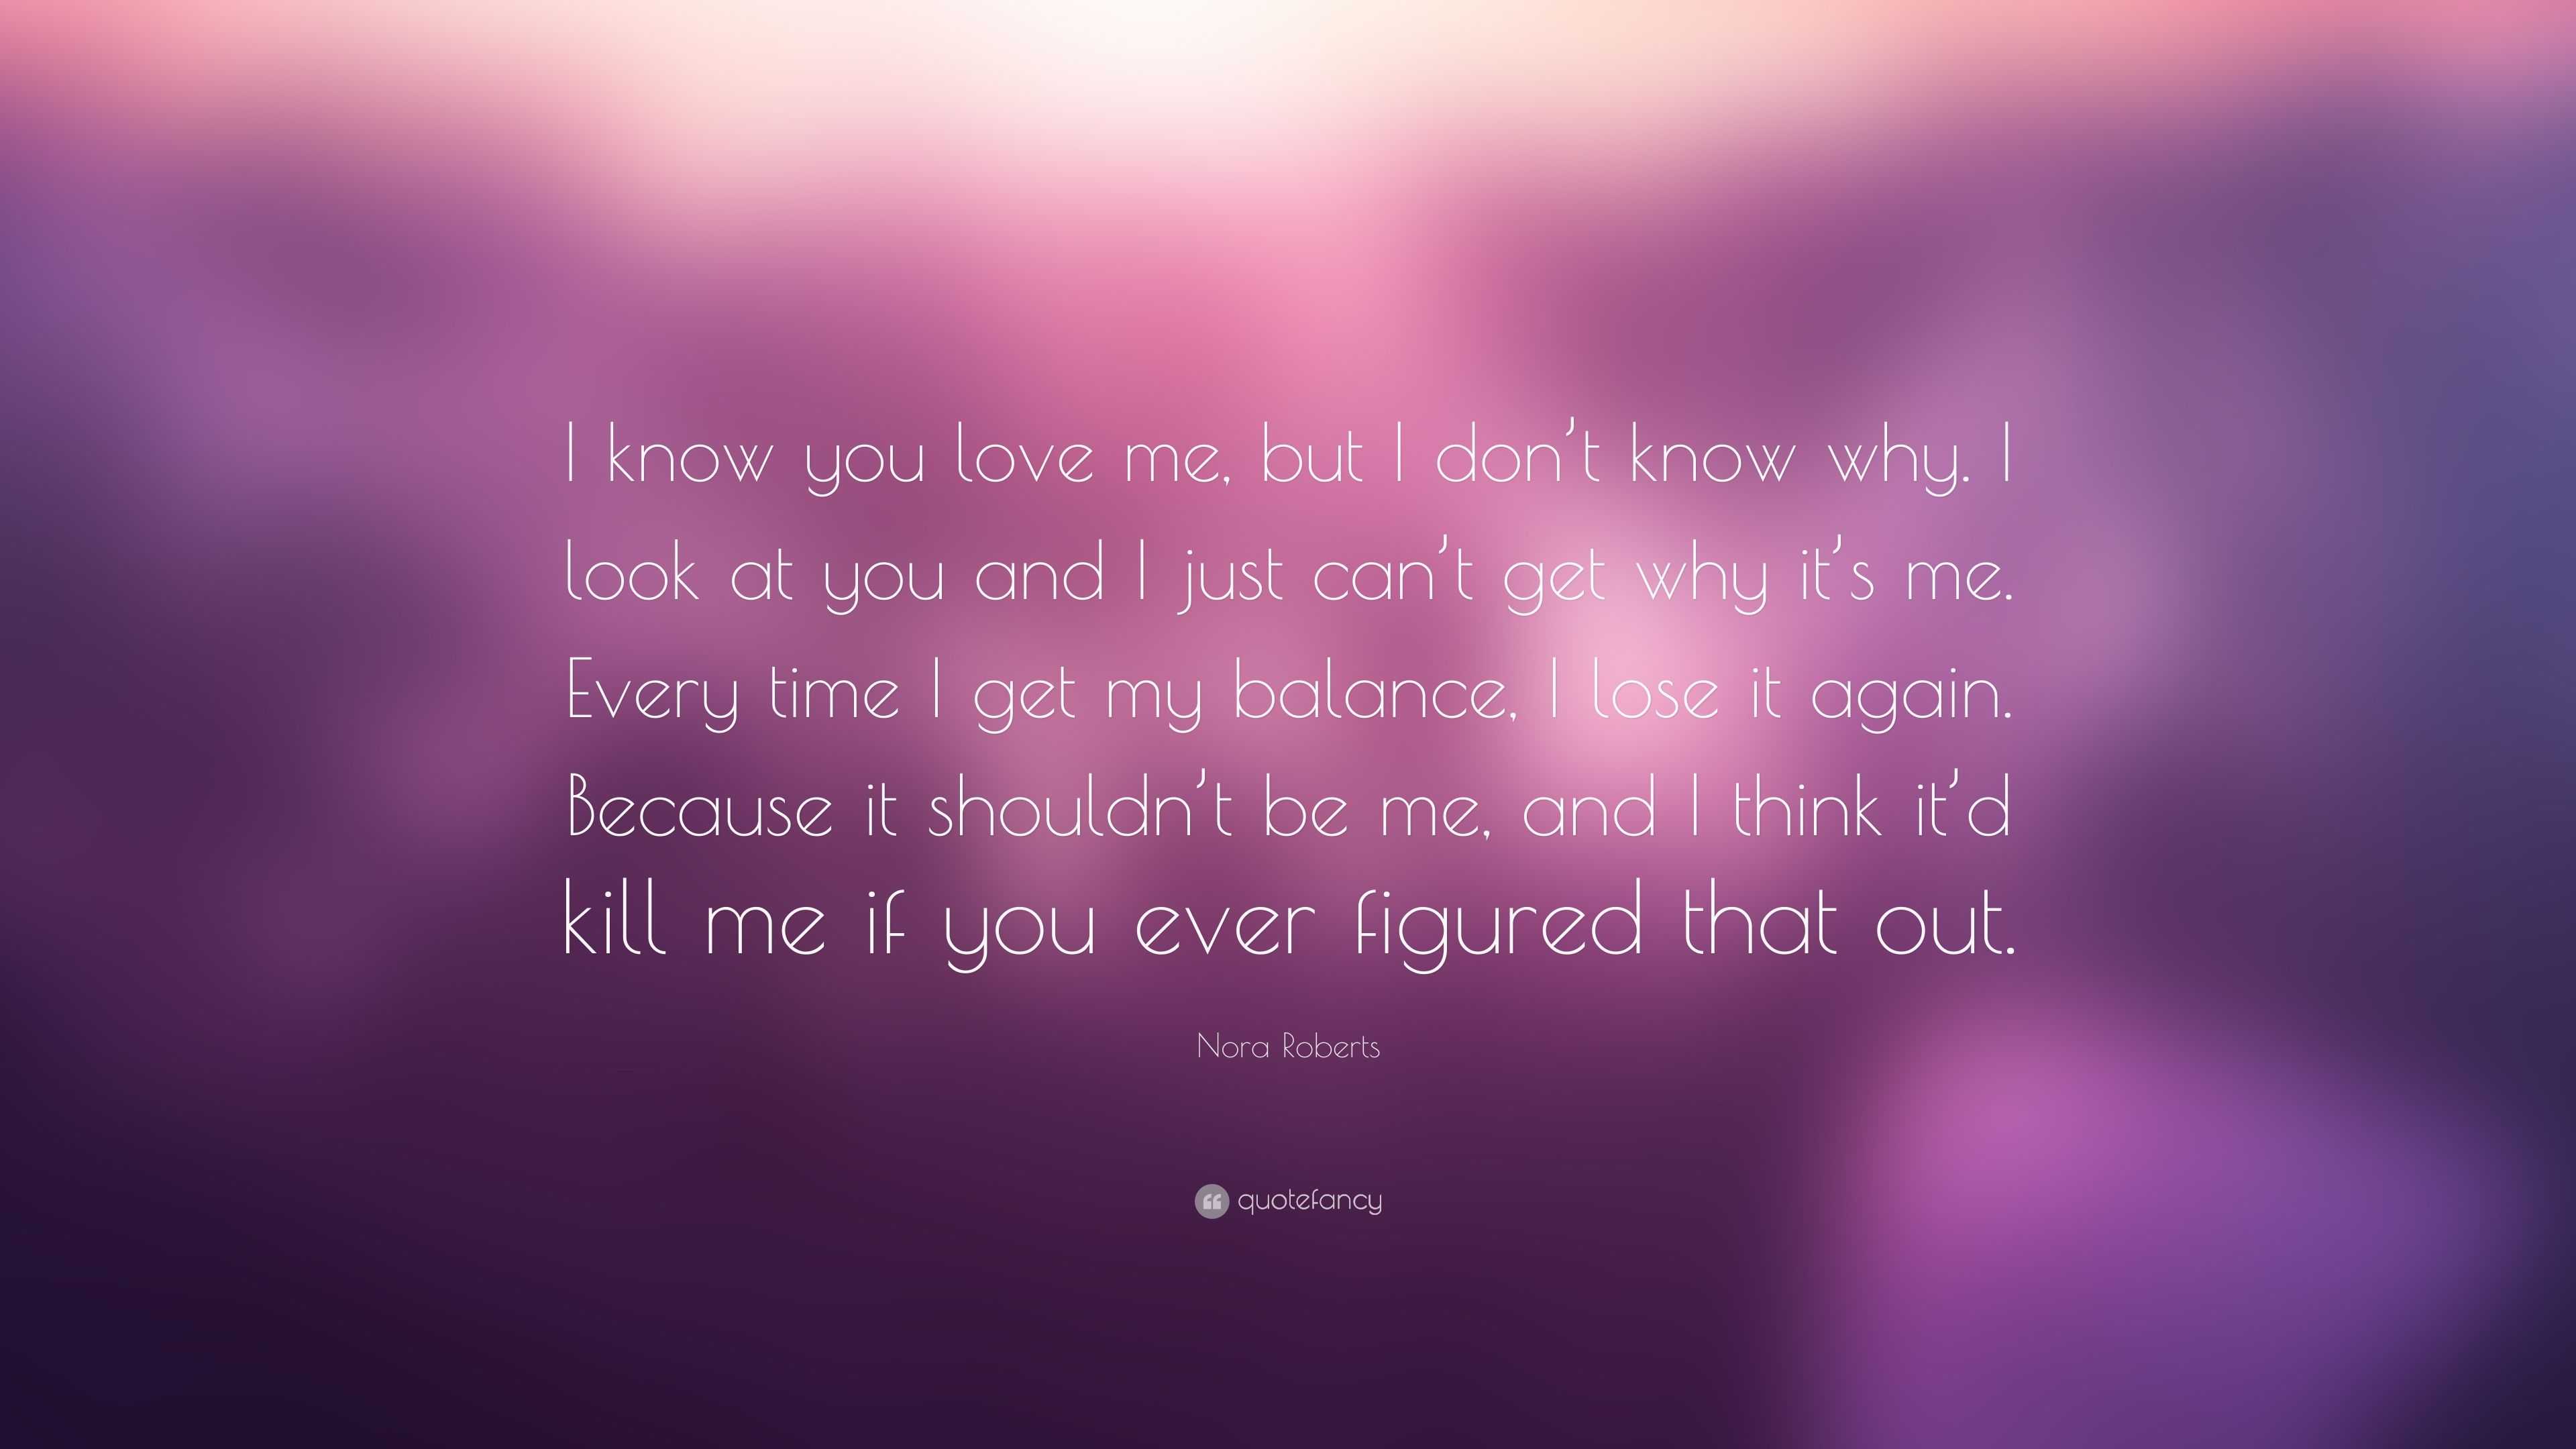 Nora Roberts Quote “I know you love me but I don t